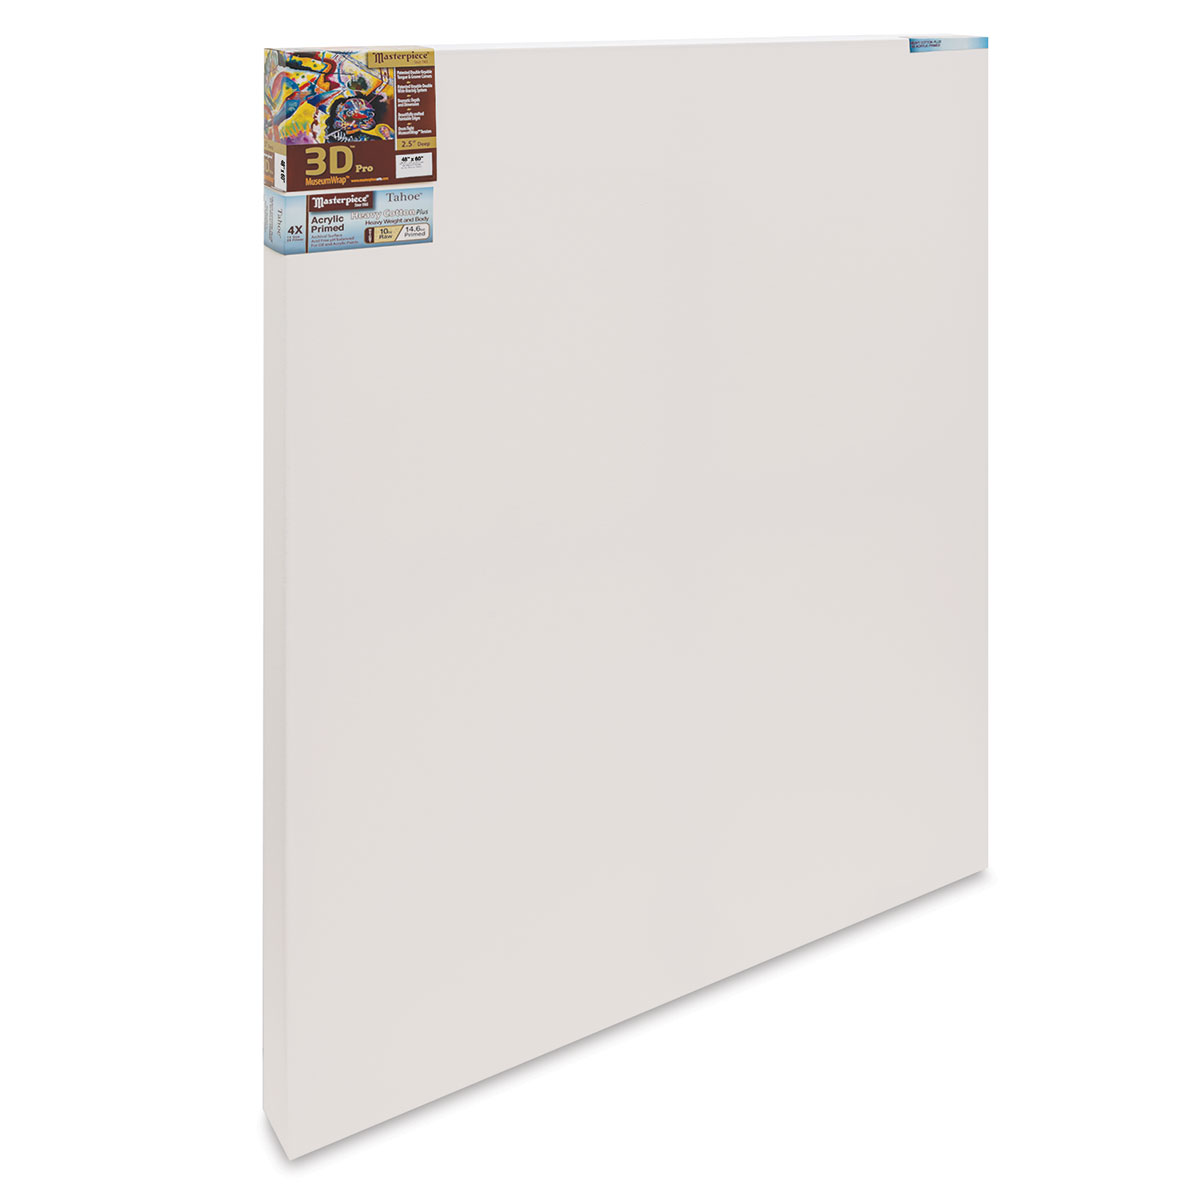  PHOENIX Extra Large Blank Canvas 30x40 Inch - 3 Pack 100%  Cotton 12 oz. Triple Primed Pre Gessoed White Stretched Canvases for  Painting - Ready to Paint Art Paint Canvases for